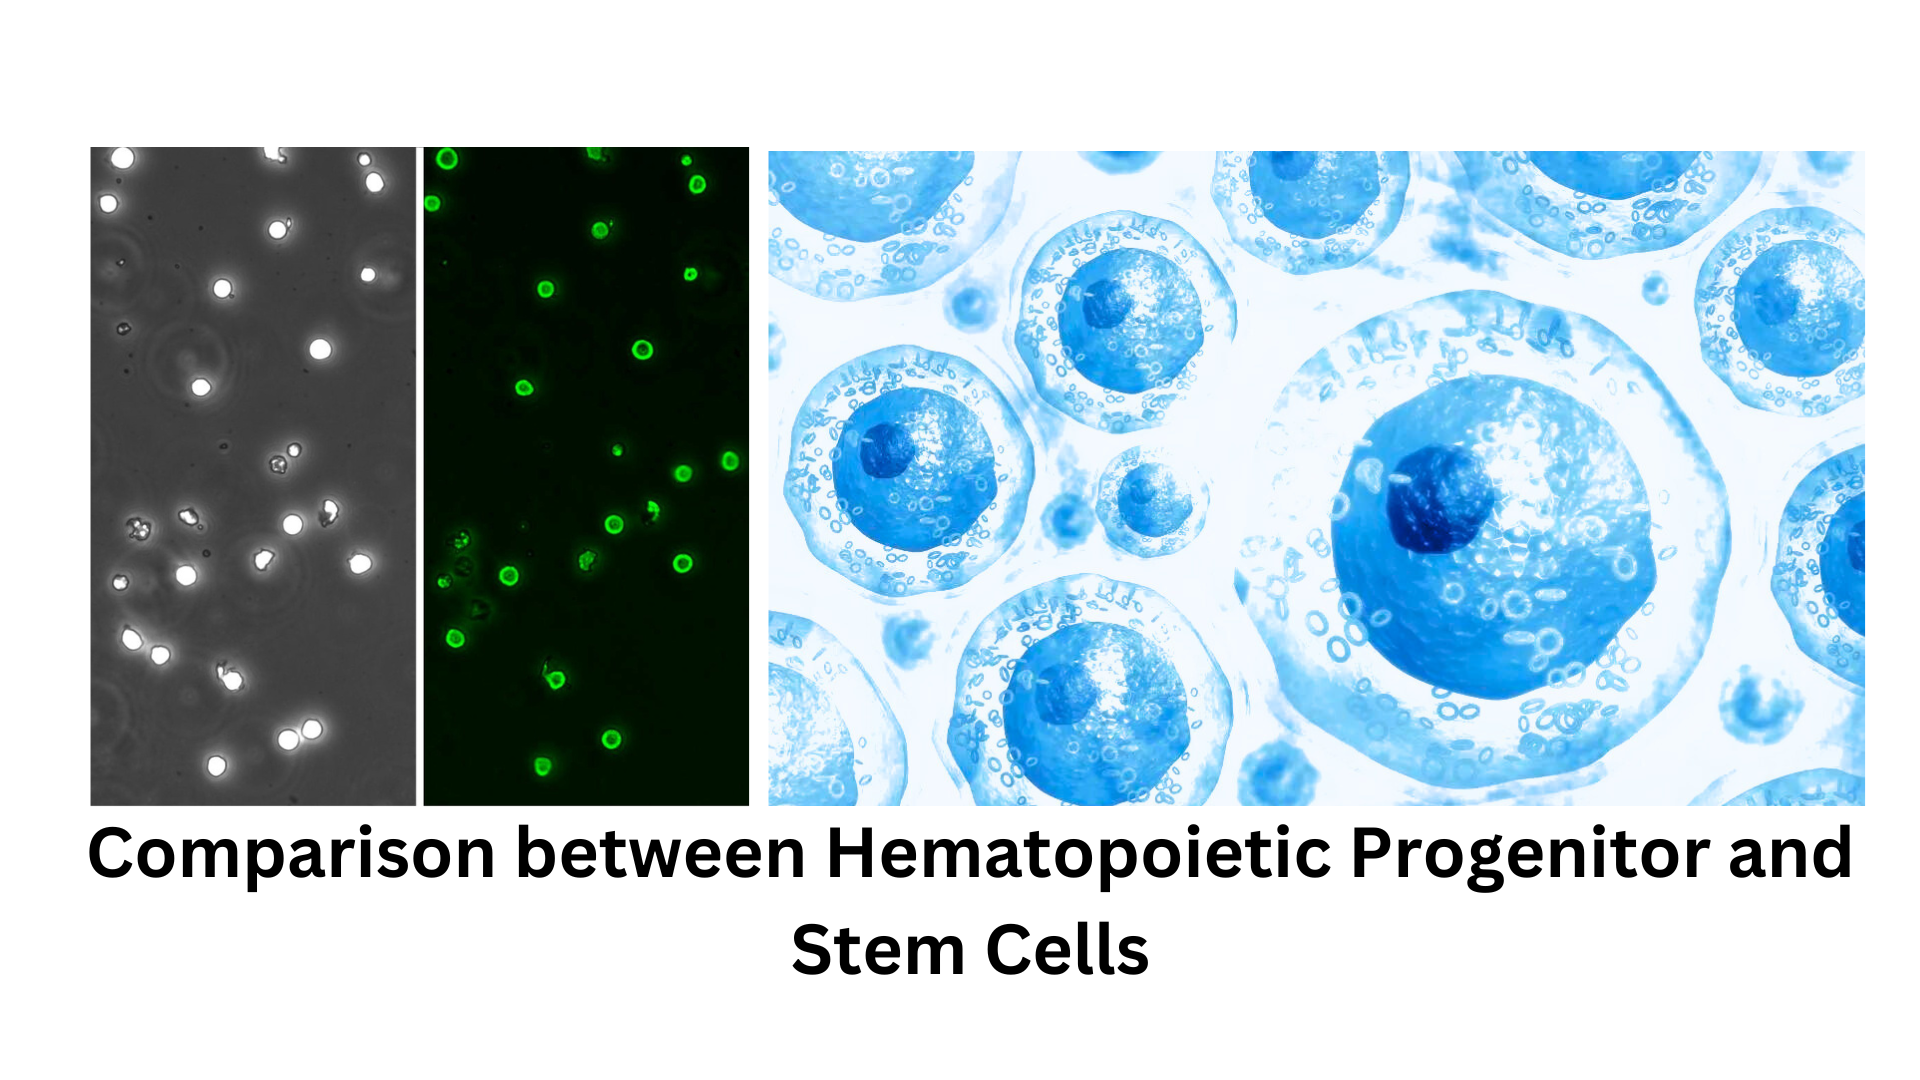 Comparison-between-Hematopoietic-Progenitor-and-Stem-Cells.